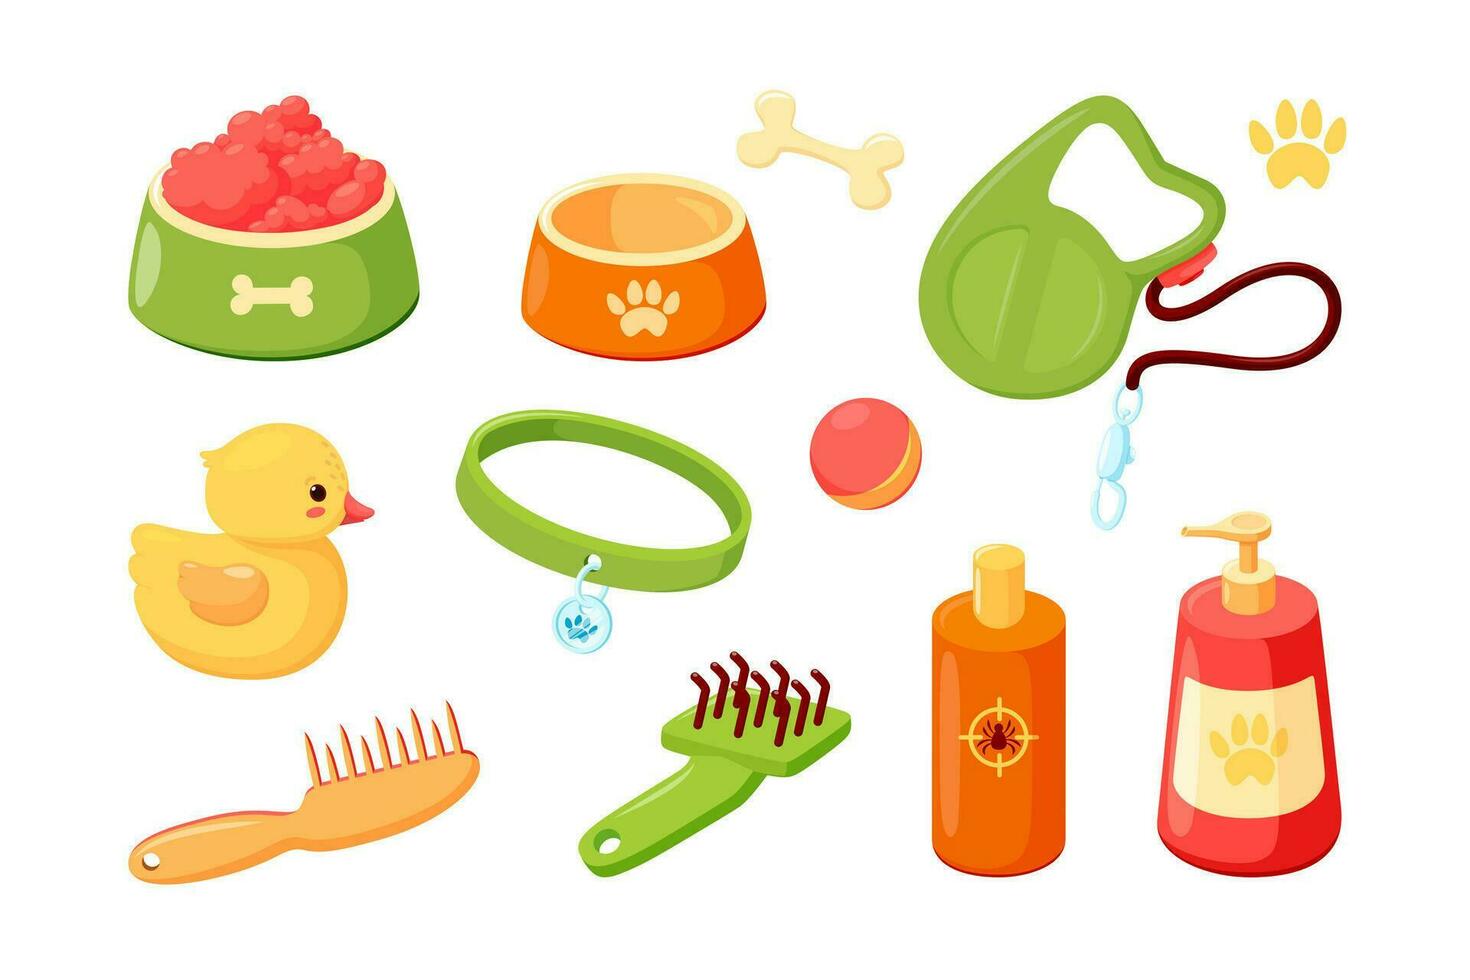 Dog accessories with collar, bowls, duck, combs, shampoo and leash. Puppy stuff for grooming, feeding and games. Vector illustration